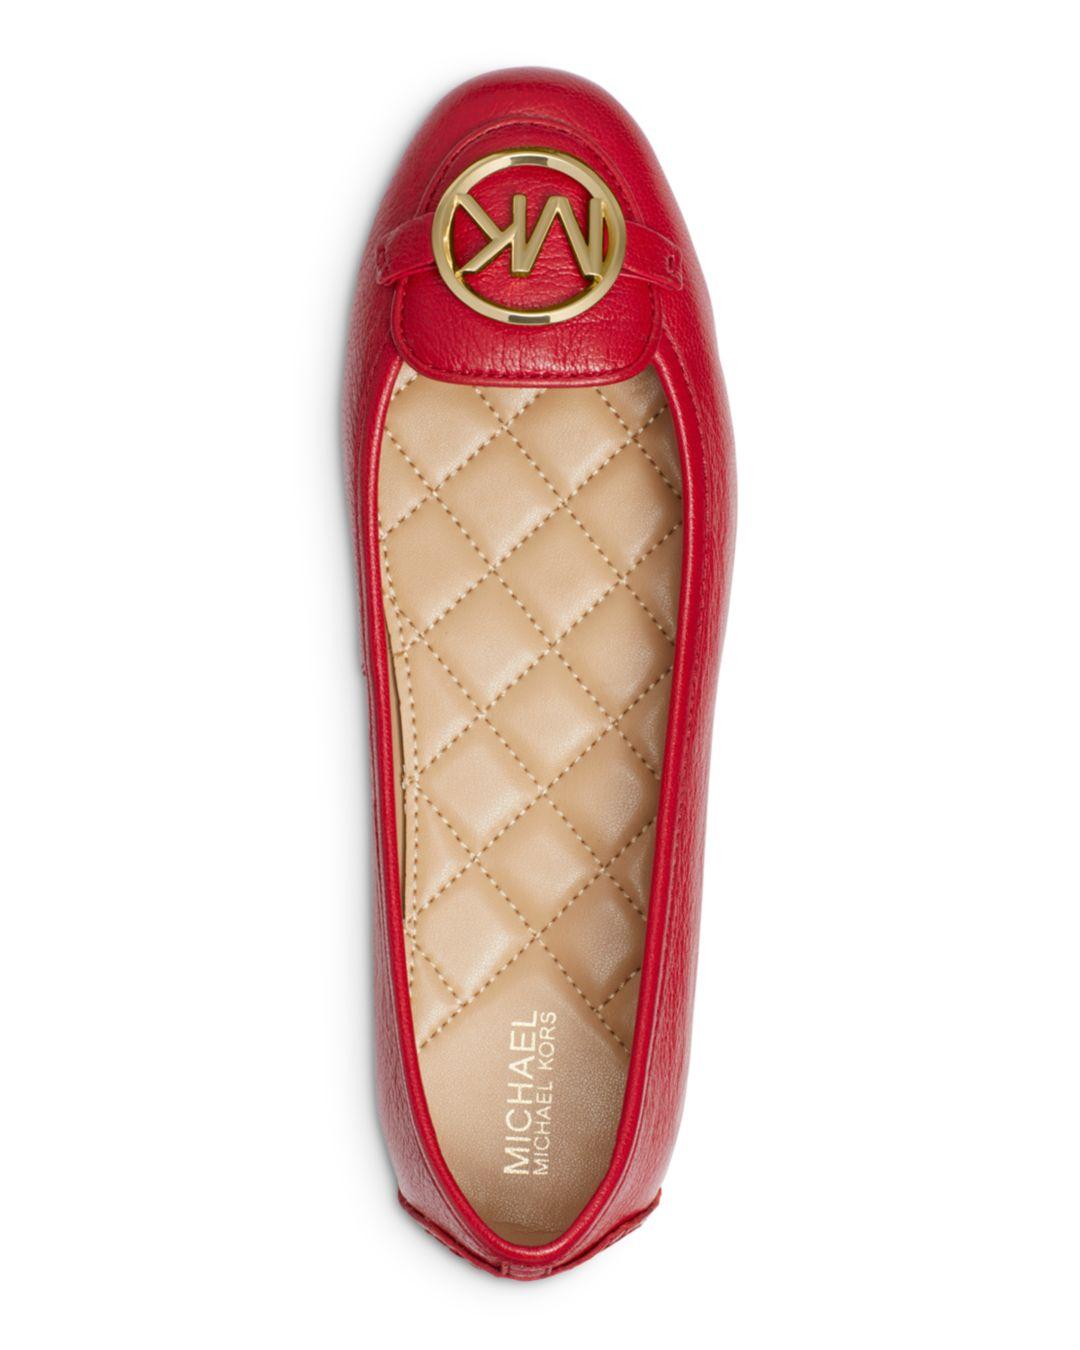 mk red flat shoes